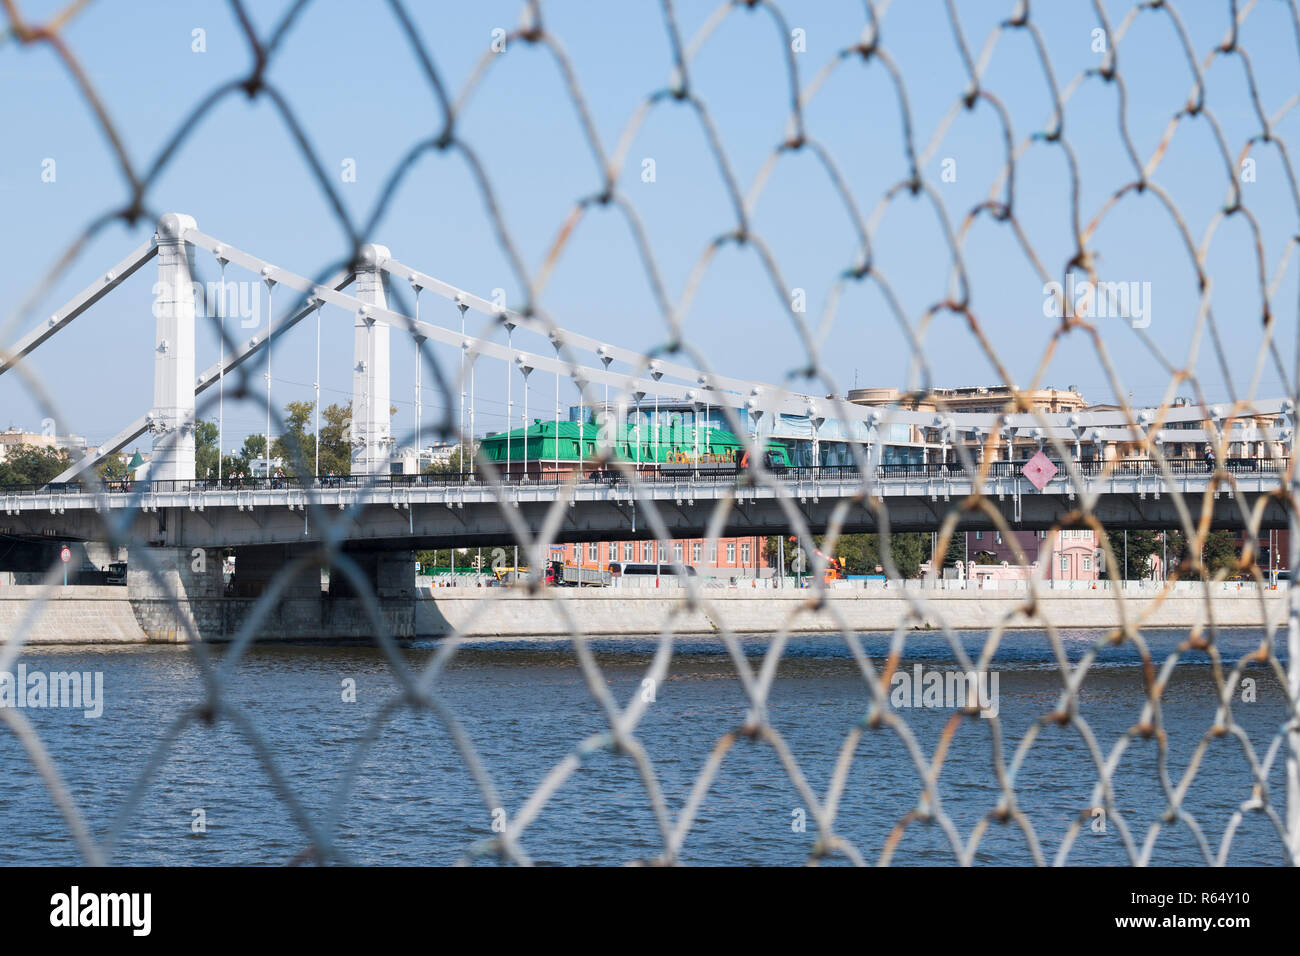 Landscape of a suspension bridge over the Moskva River. A view from behind the grid (Rabitz). The concept of restriction freedom of movement. Stock Photo